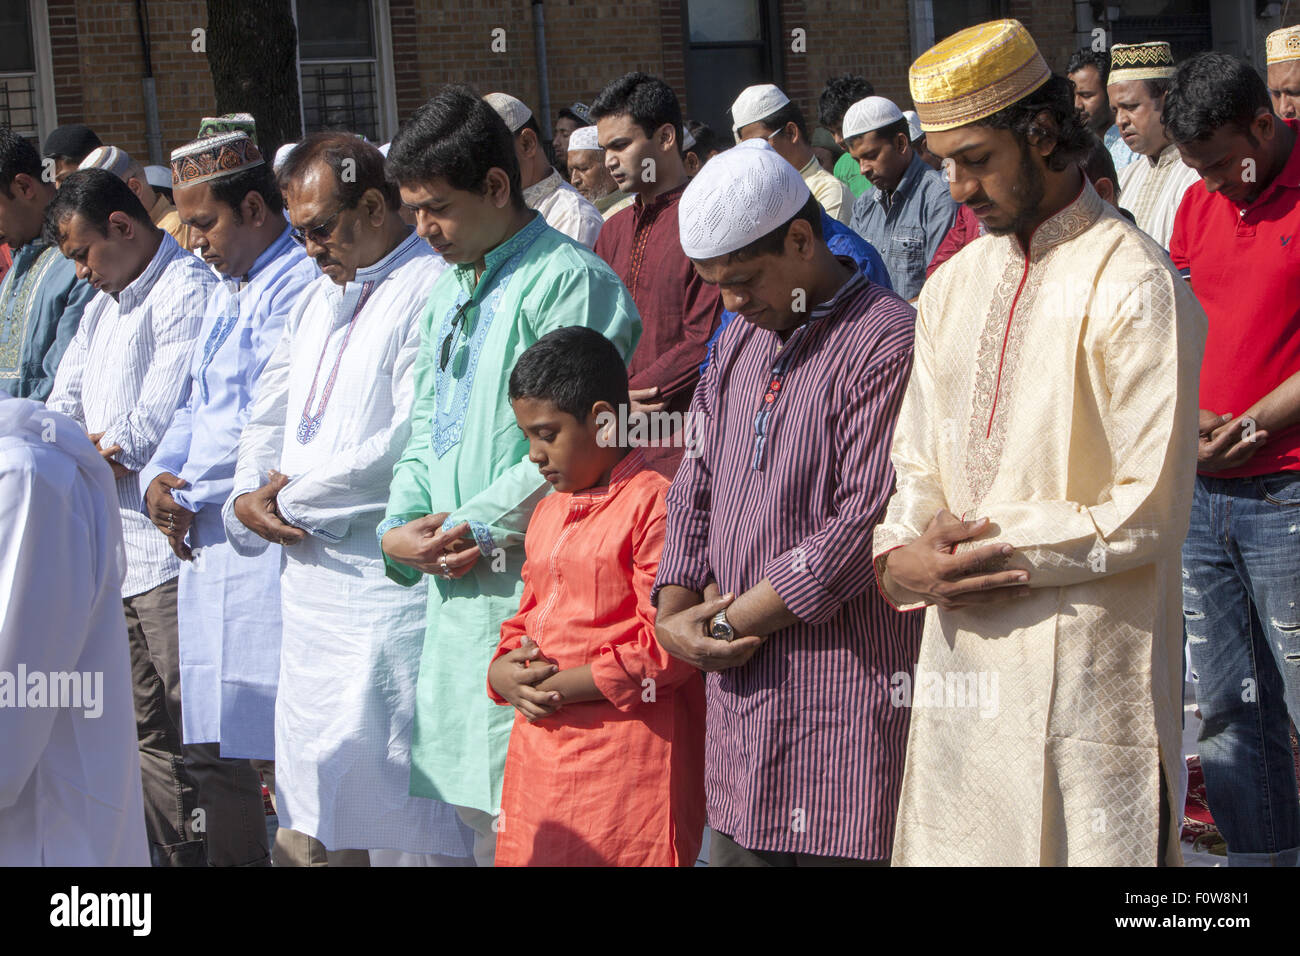 Muslims pray outside a mosque in Kensington, Brooklyn, NY for 'Eid al-Fitr.' The holiday,celebrated around the world, marks the Stock Photo